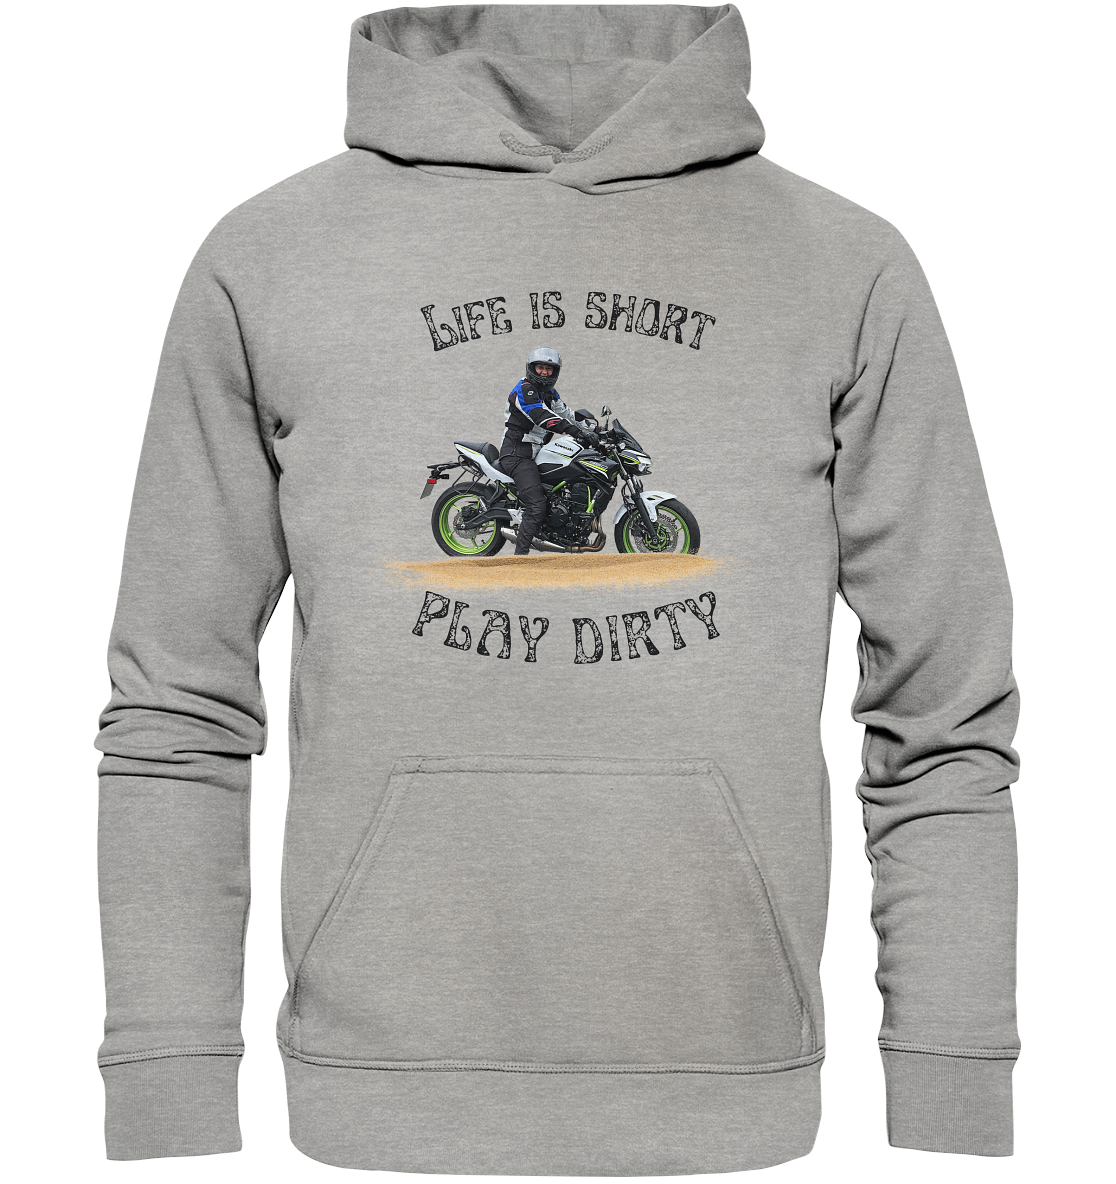 "Life is short - play dirty" | Hoodie in dunklem Design